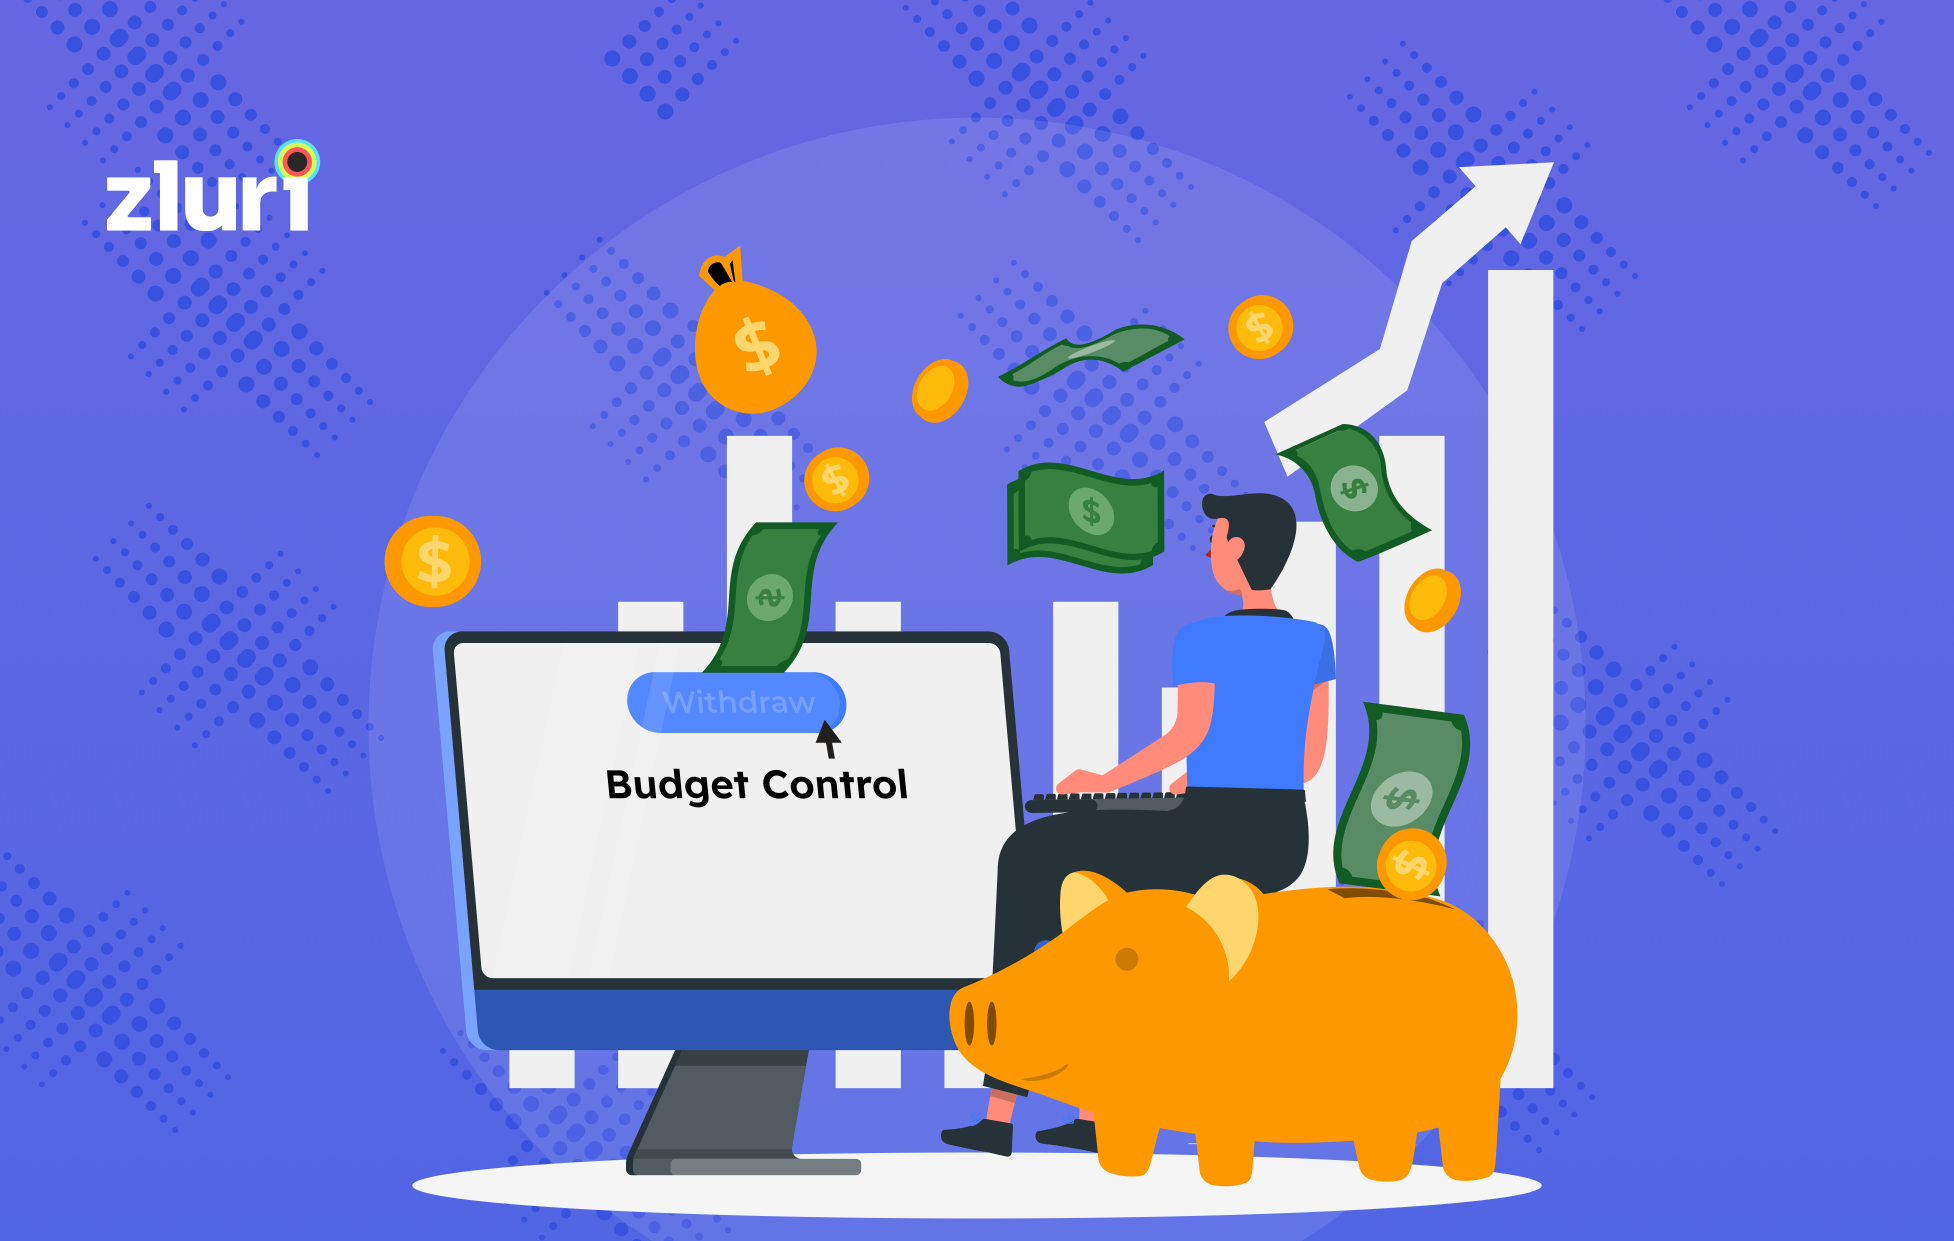 7 Tips To Keep Your IT Budget In Control - What You Should Know About